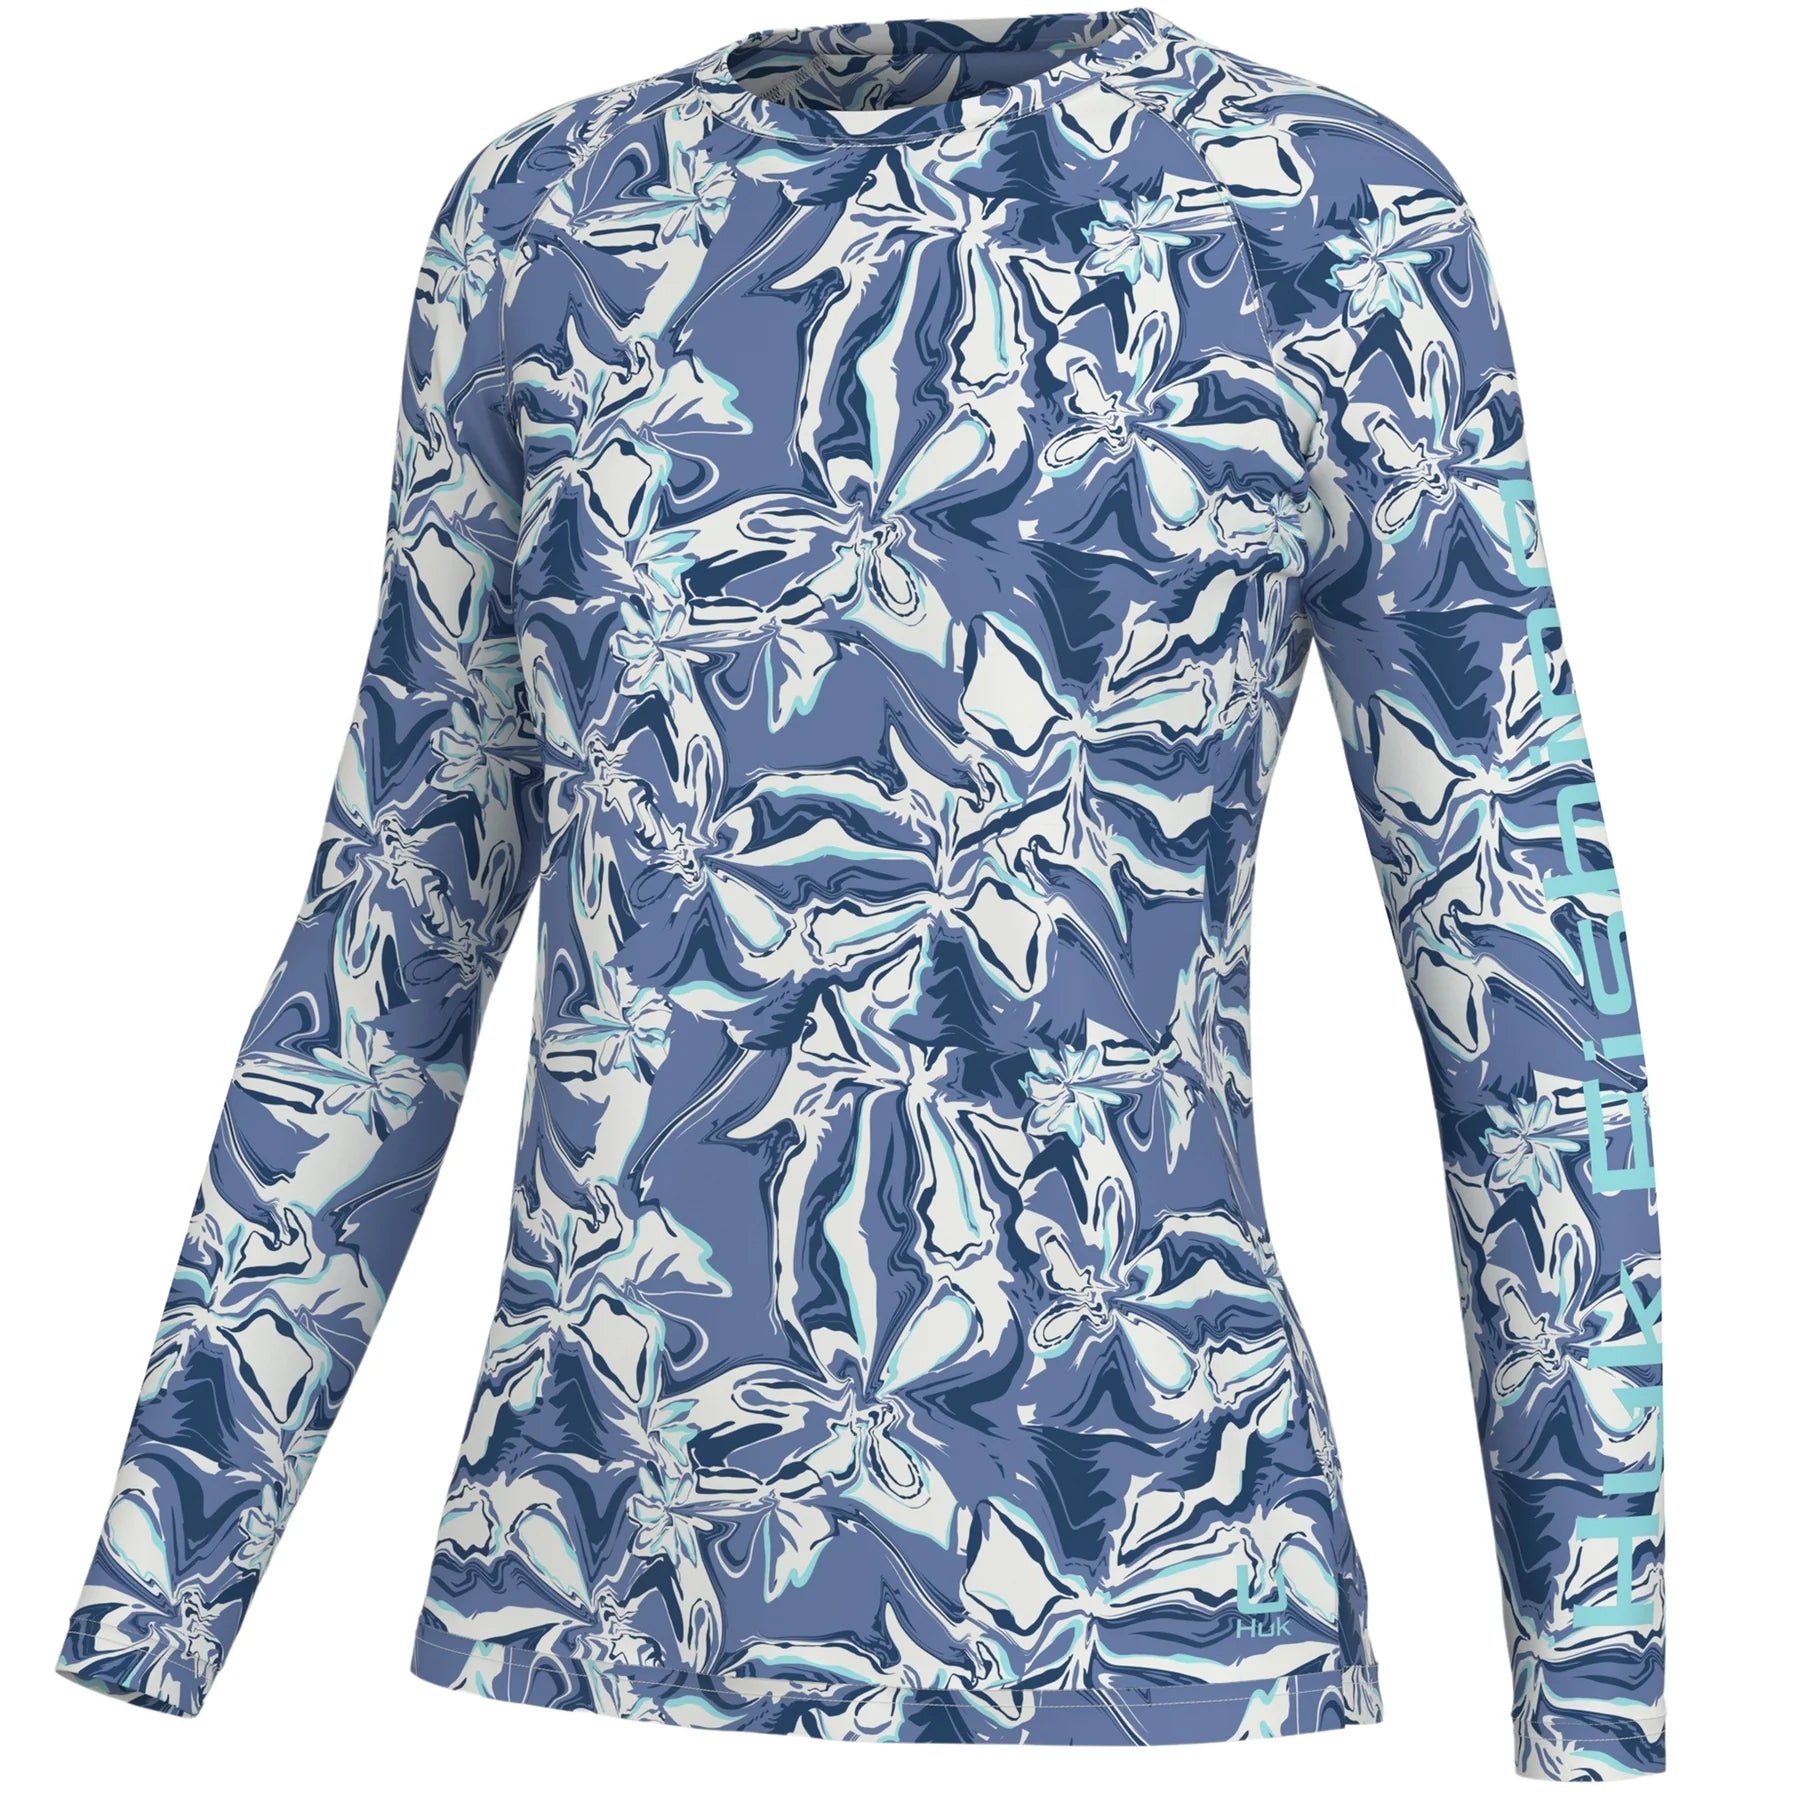 HUK Women's Floral Performance Long Sleeve in Blue